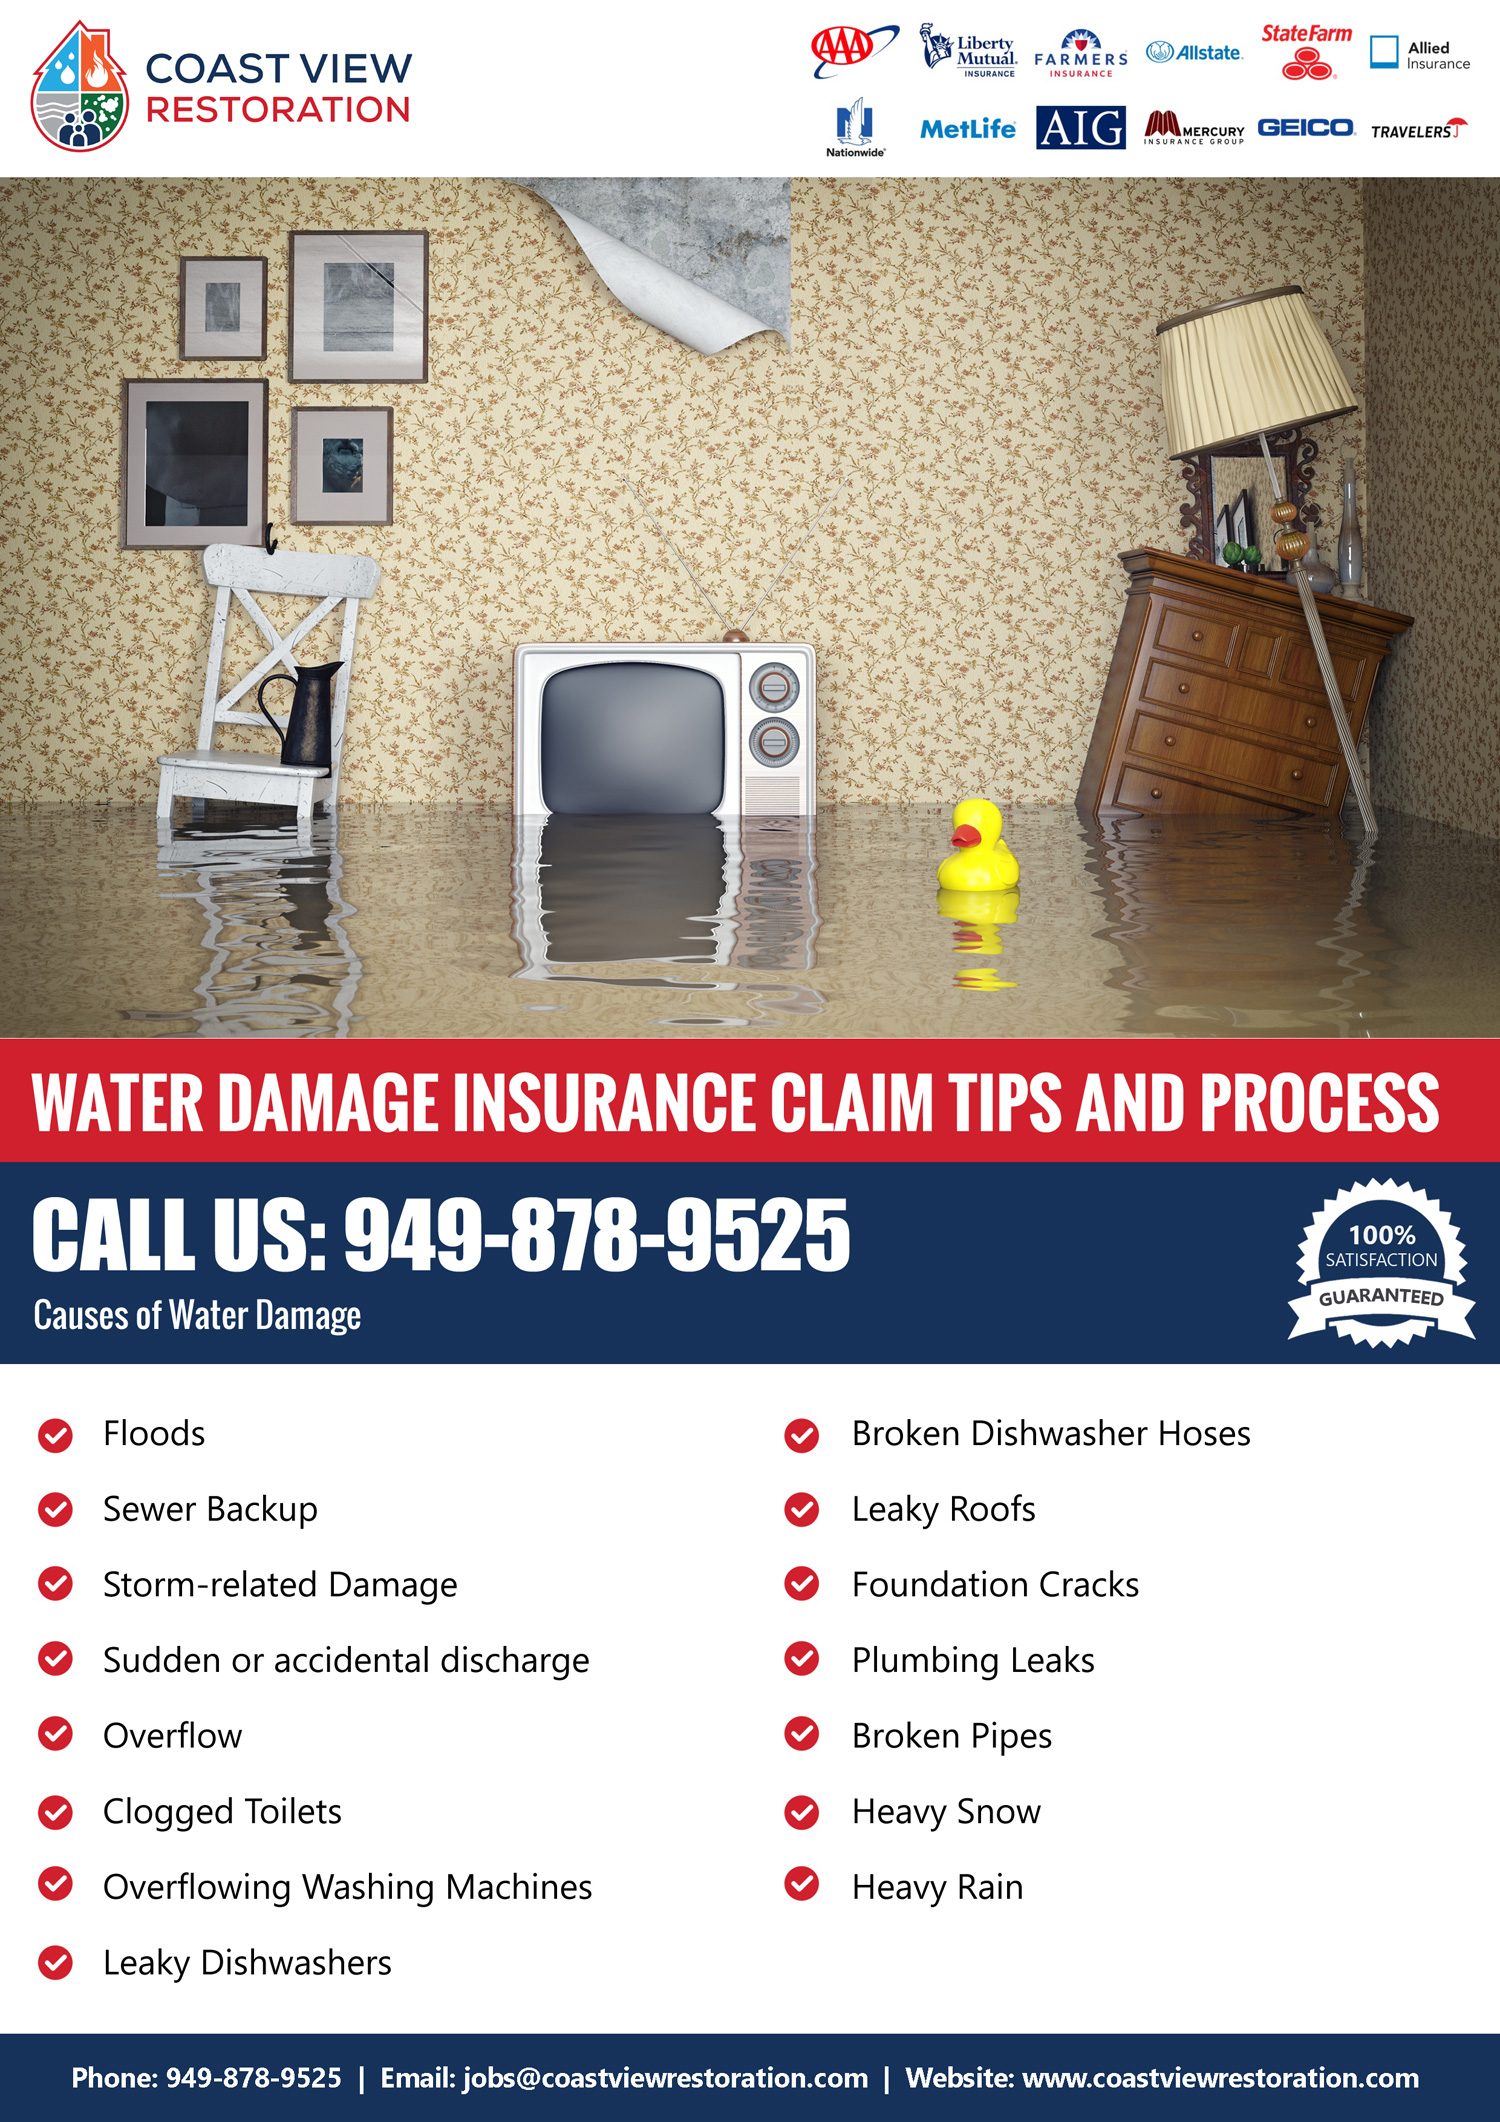 Water-Damage Insurance Claim Tips and Process